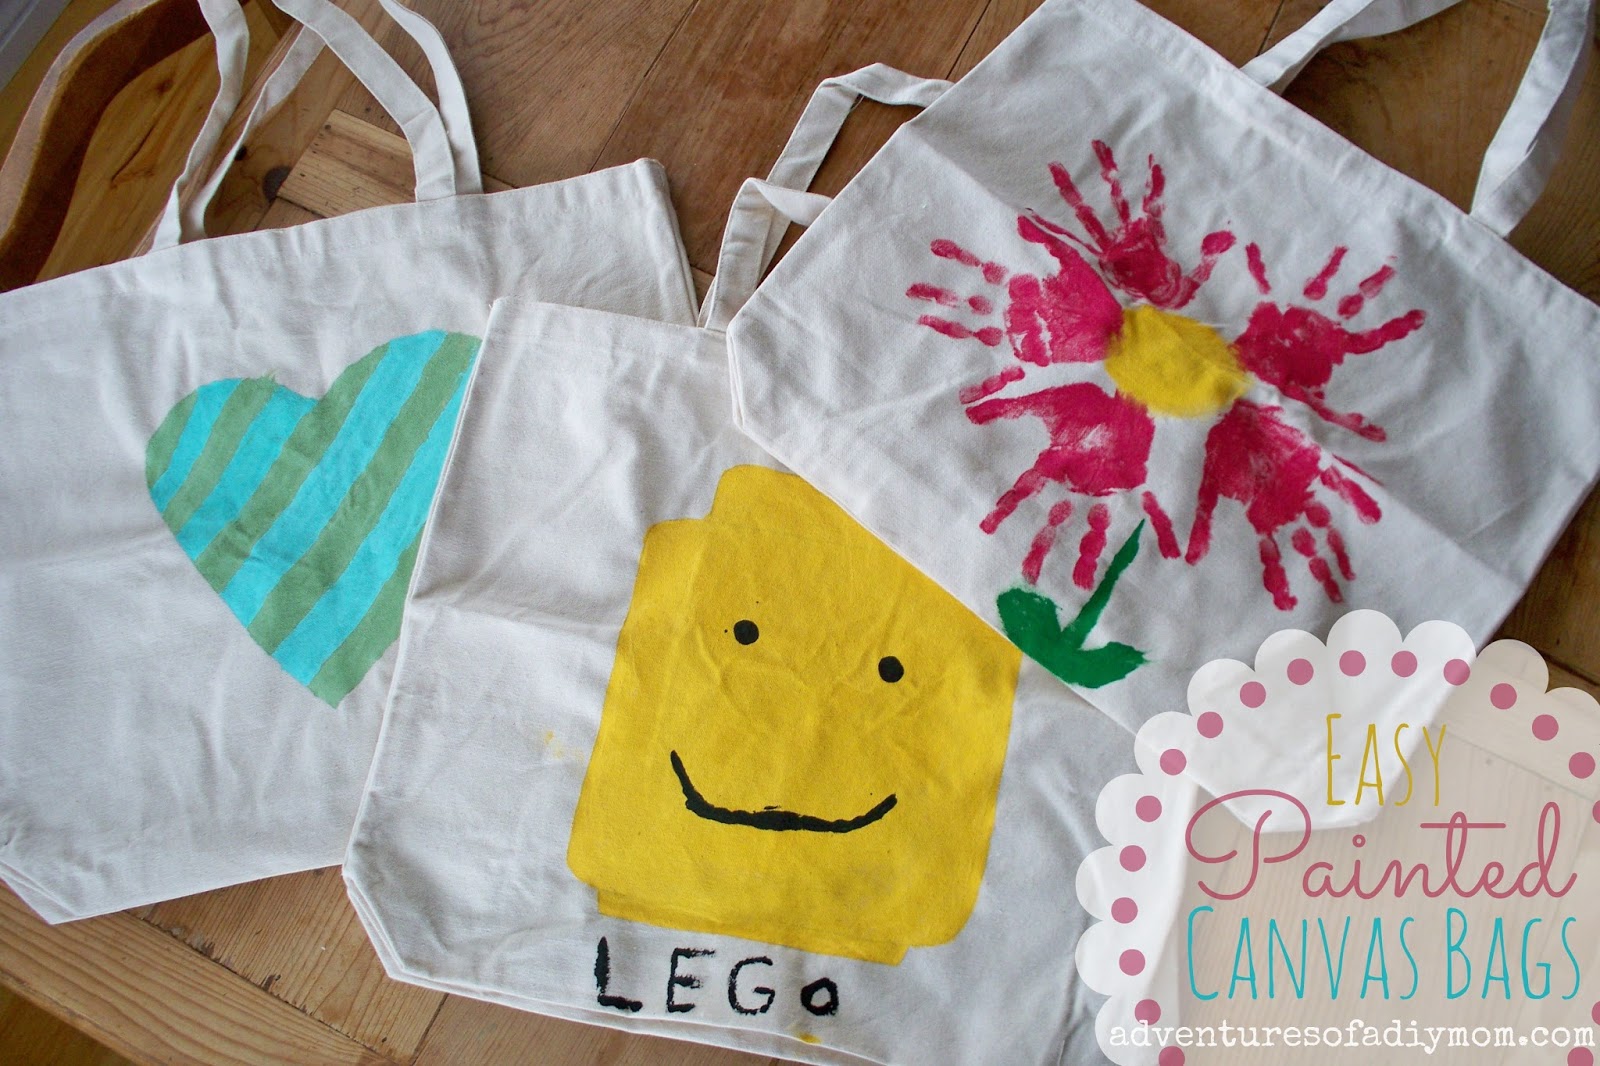 Easy Painted Canvas Bags